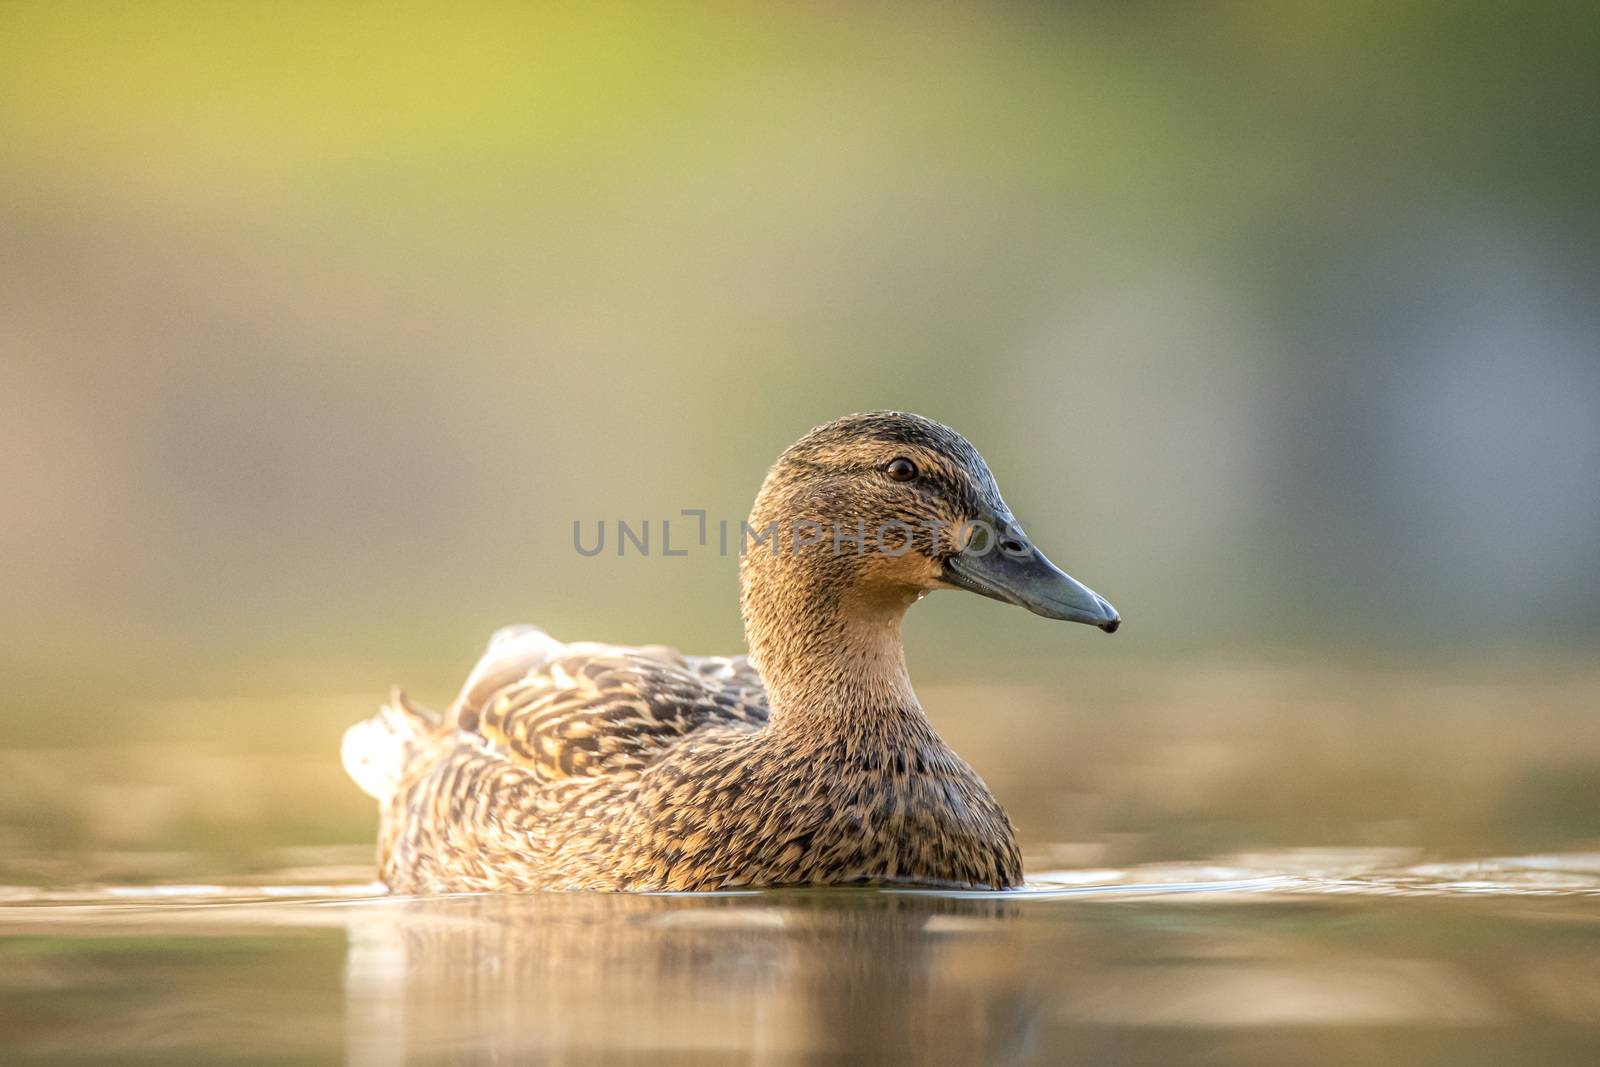 Female mallard duck. Portrait of a duck with reflection in clean lake water causing ripples on water near shore. by petrsvoboda91